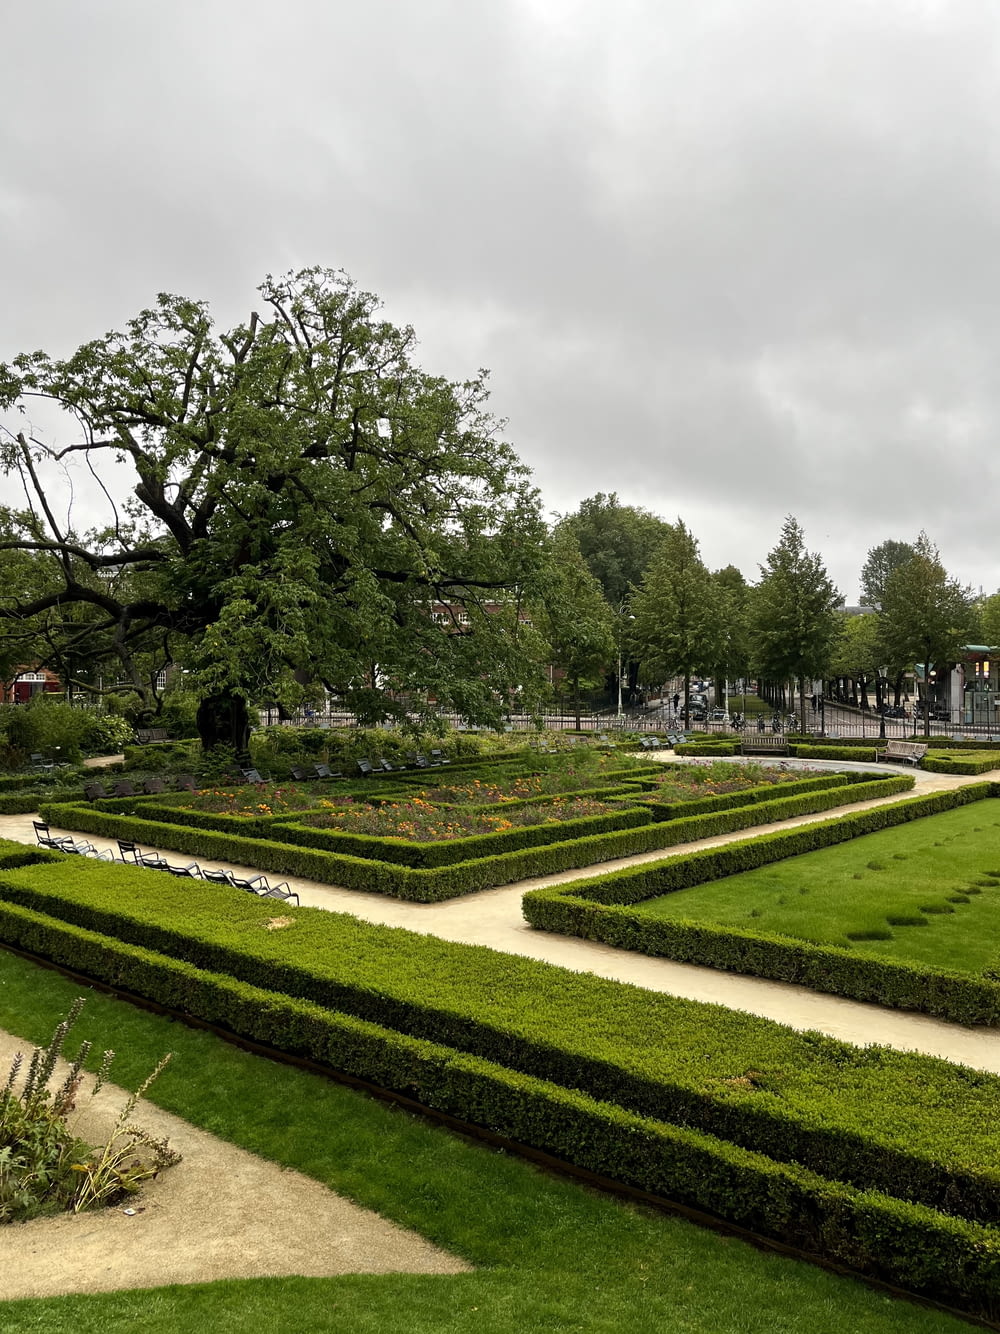 a large green garden with hedges and trees